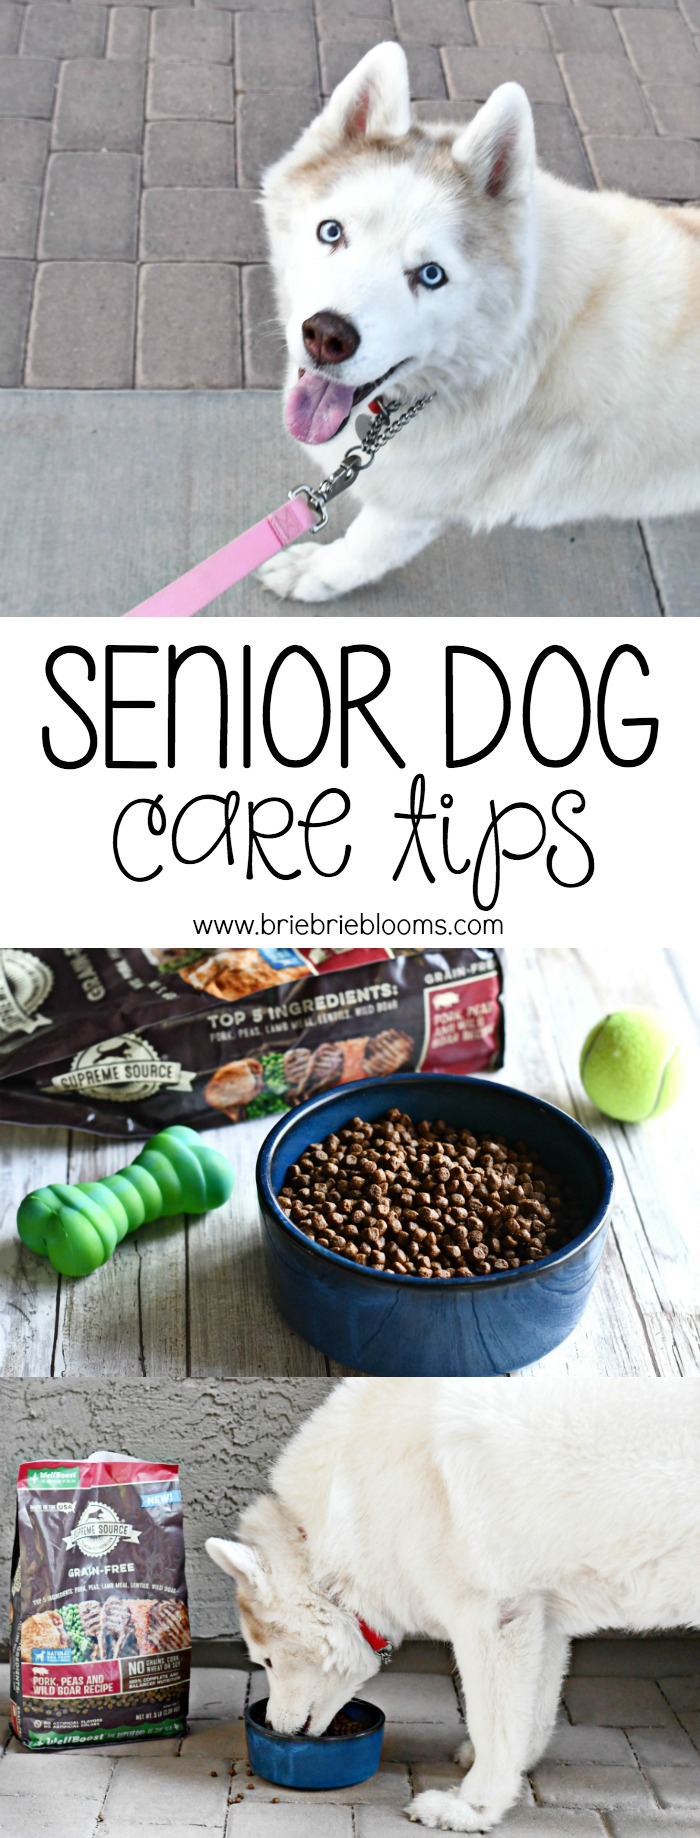 This shortlist of senior dog care tips is helpful and with just a few additions to your daily routine, your senior dog can continue living their best life.